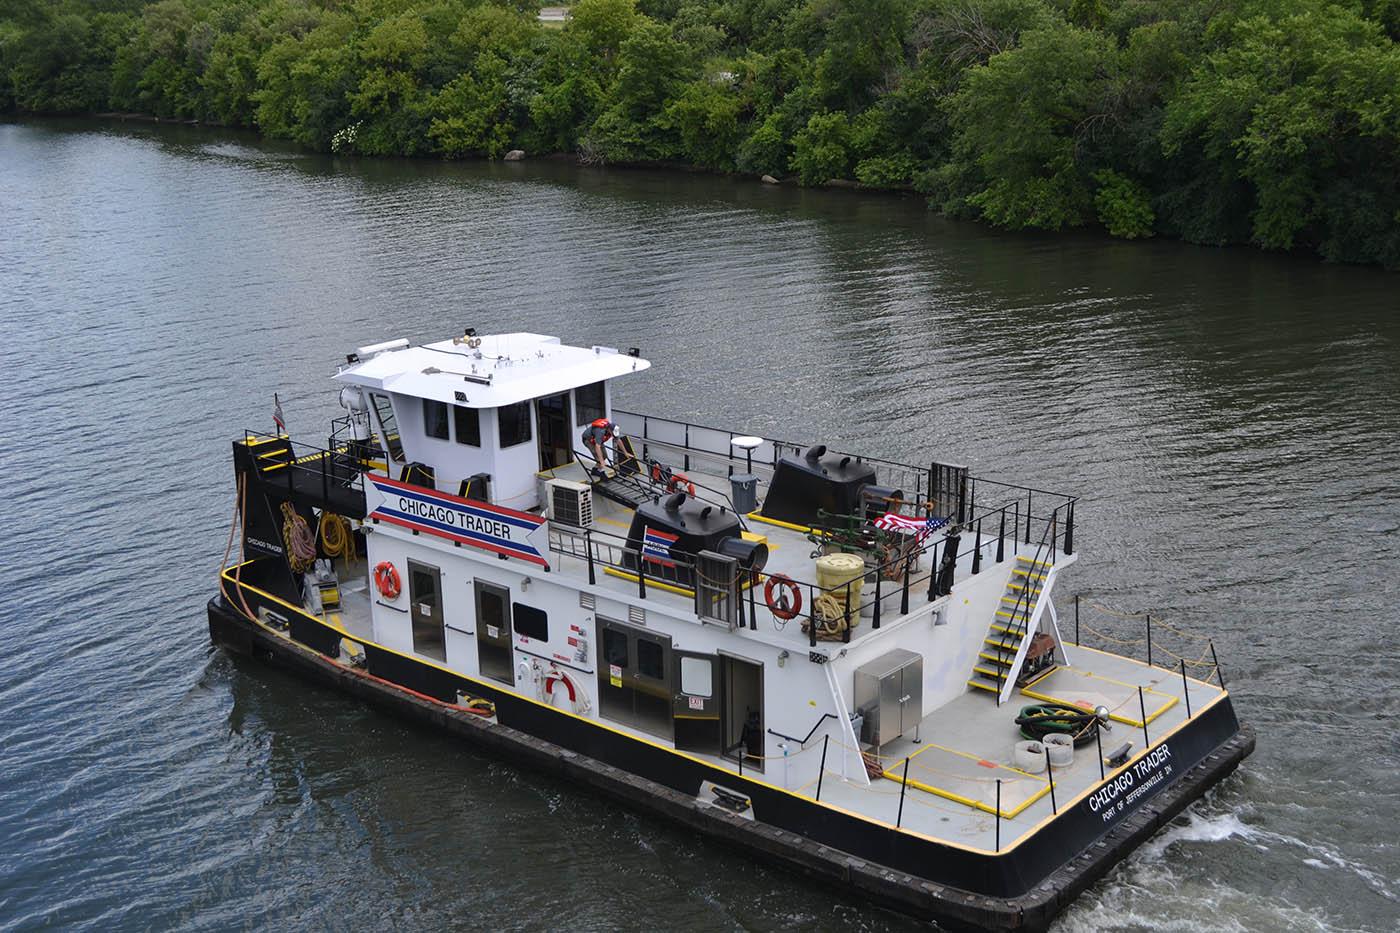 Geoffrey Baer on the Chicago Trader, a tugboat. Photo: Erica Gunderson